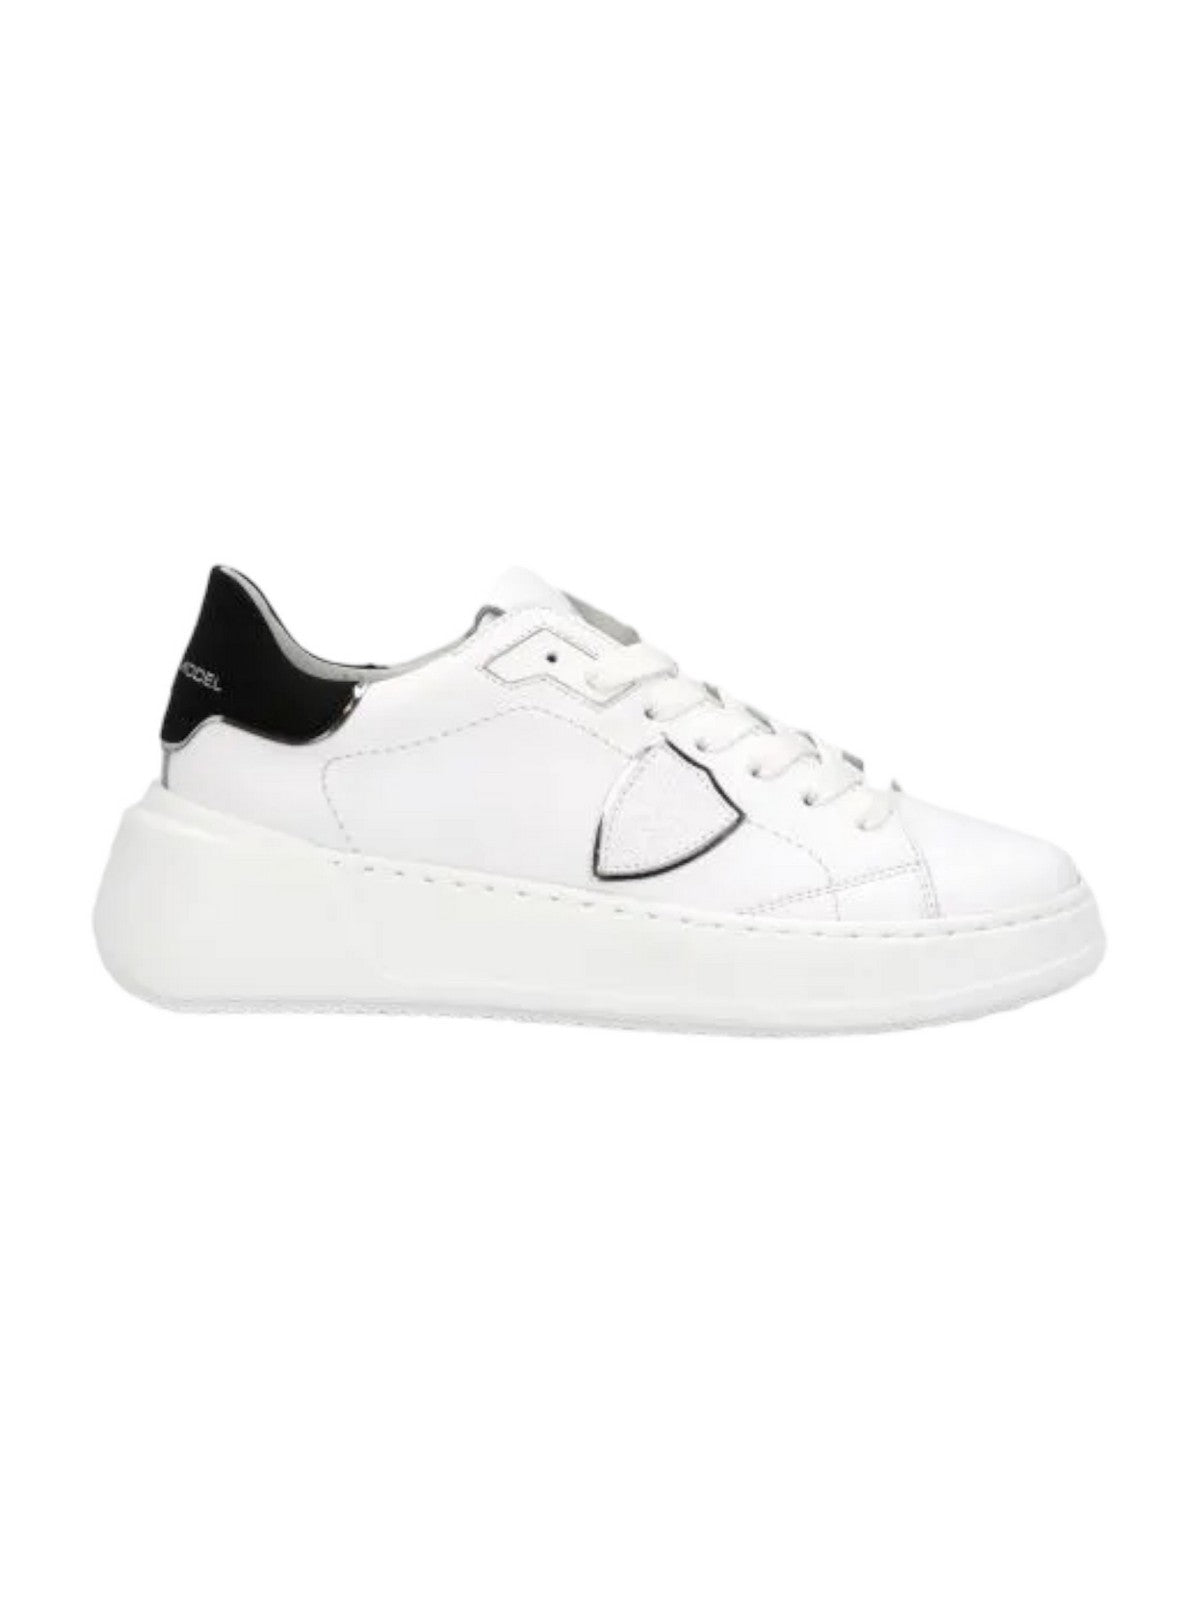 PHILIPPE MODEL Sneaker Tres temple low woman BJLD V010 White